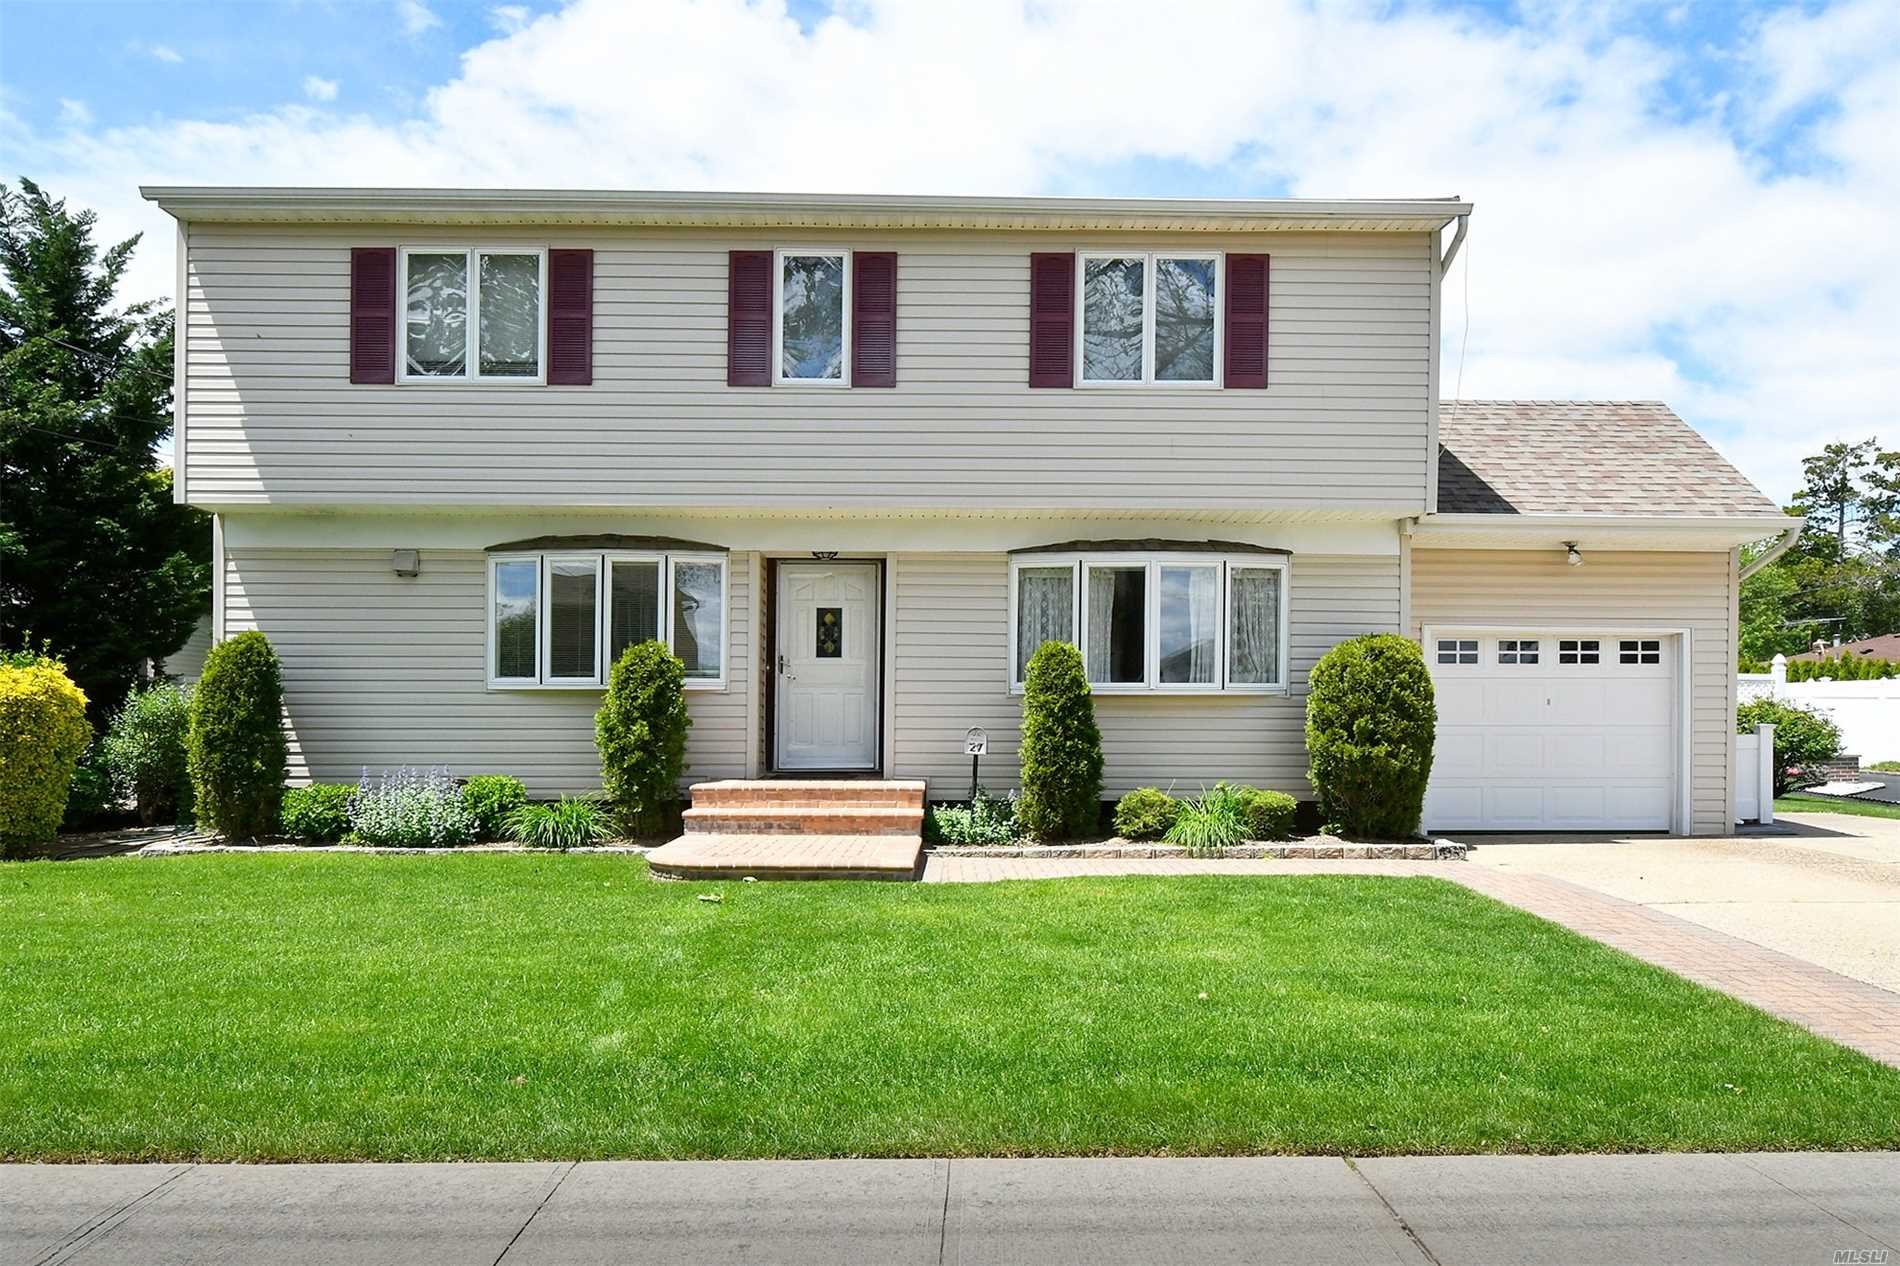 Dont Miss this Fantastic Opportunity to Own a Colonial in North Bethpage! All Spacious Rooms! This Home Features a Master Size Bedroom on the 1st floor w/Full Bath Nearby! Then 3 More Bedrooms Upstairs, An Office/4th Bed & An Upstairs Den which can easily be turned into a 6th Bedroom! This home also features Newer CAC, IGS, 200 Amp Elec, Att Garage, All 3 baths updated! Banquet Sized Dining Room! Updated Roof & So Much More!!! 19-20 Grievance Approved, 20-21 Pending, Kramer Lane Elementary!